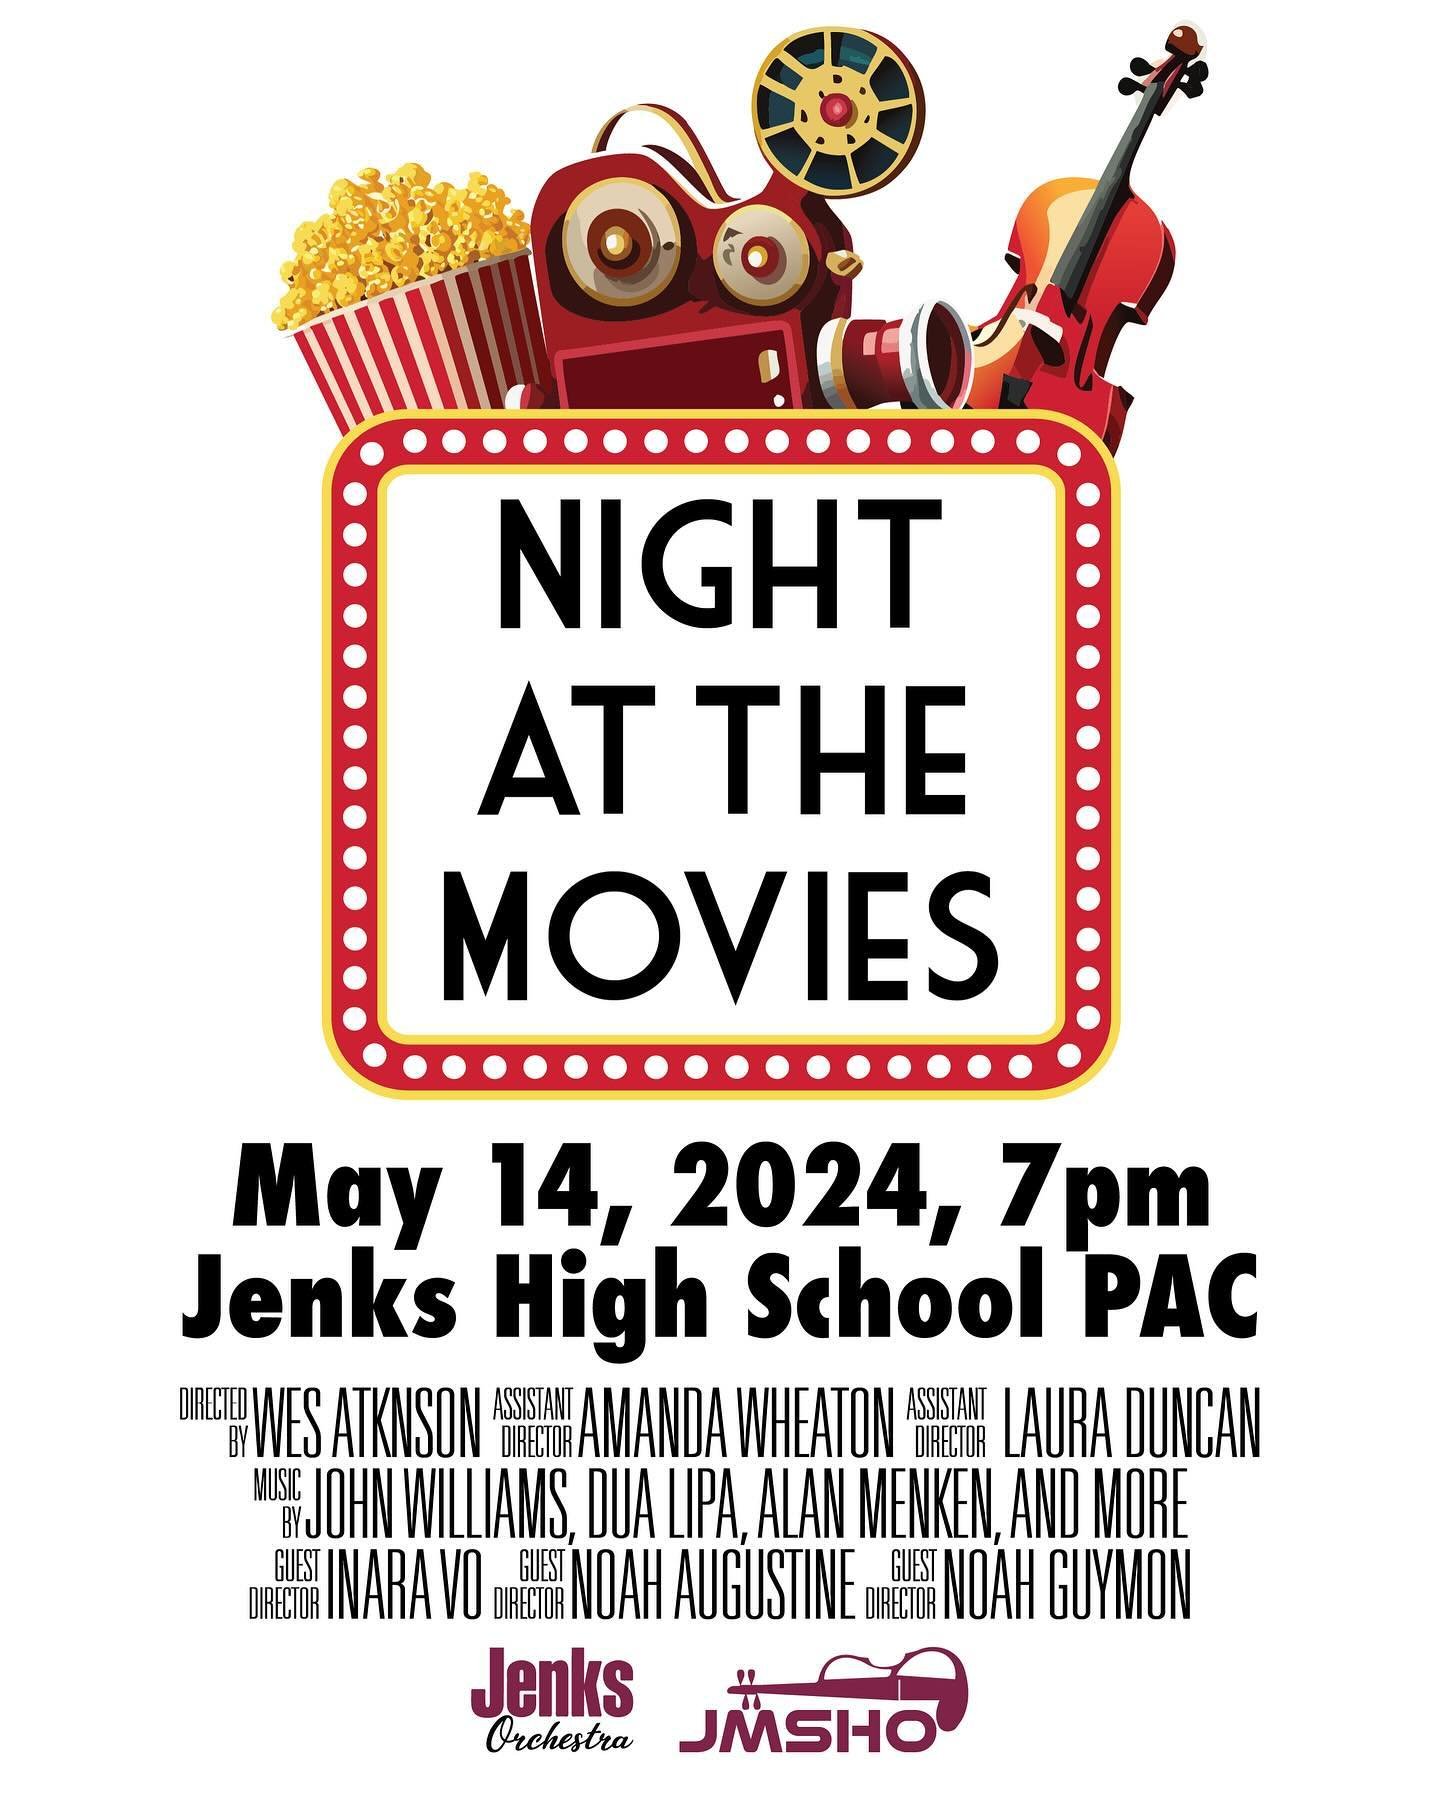 Don&rsquo;t forget to join us tomorrow evening for our final concert of the year&hellip; A Night at the Movies!!🍿🎥🎞️

Get excited to hear a performance by JMSHO as well as all three high school orchestras! We will also celebrate our seniors as the